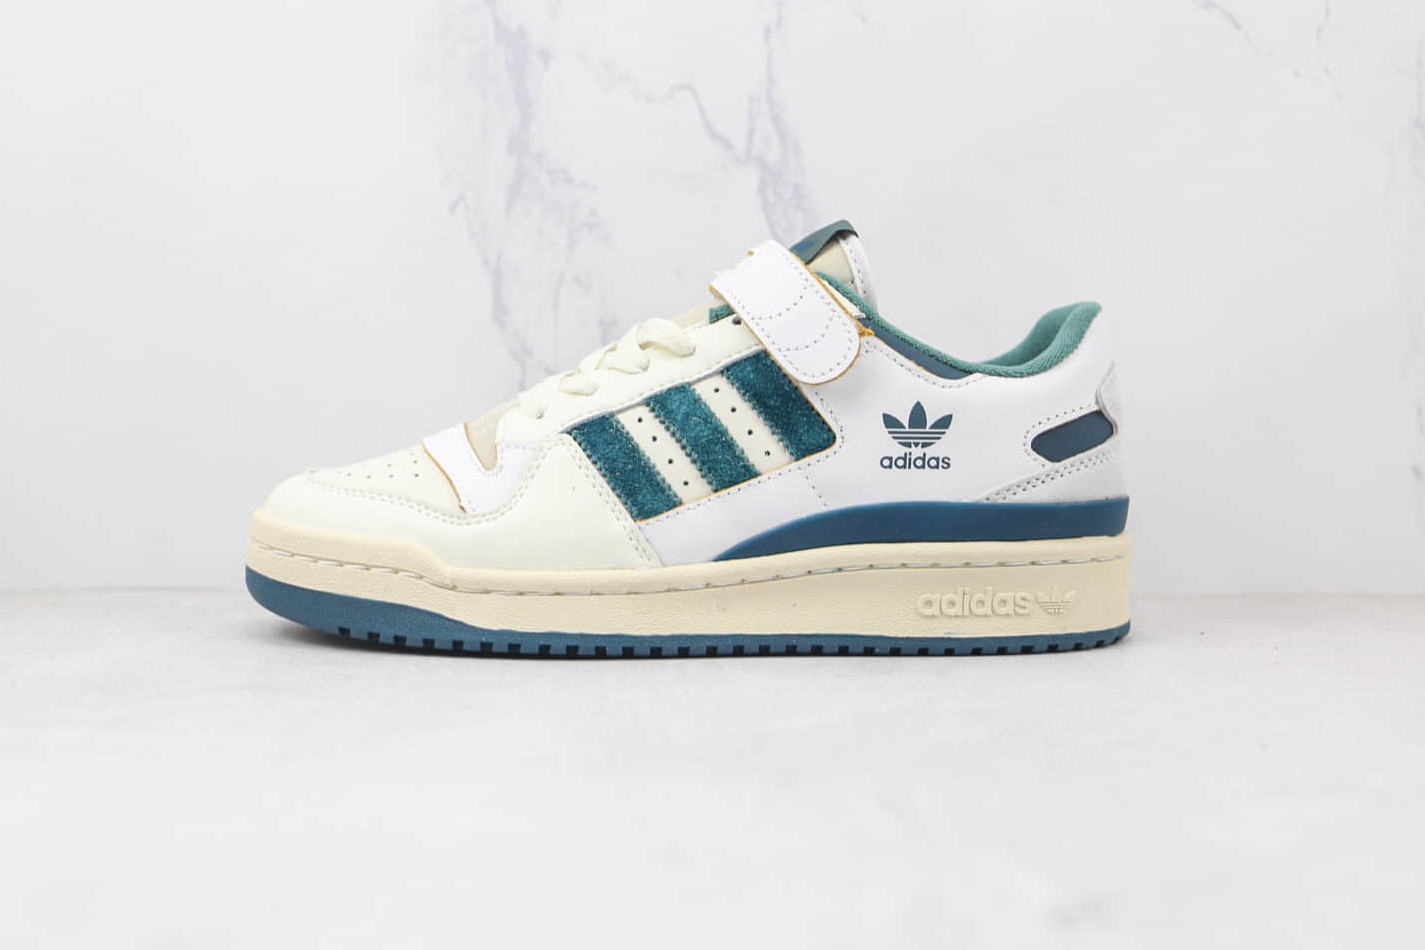 Adidas Forum 84 Low 'White Wild Teal' GX4536 - Stylish Sneakers for Men